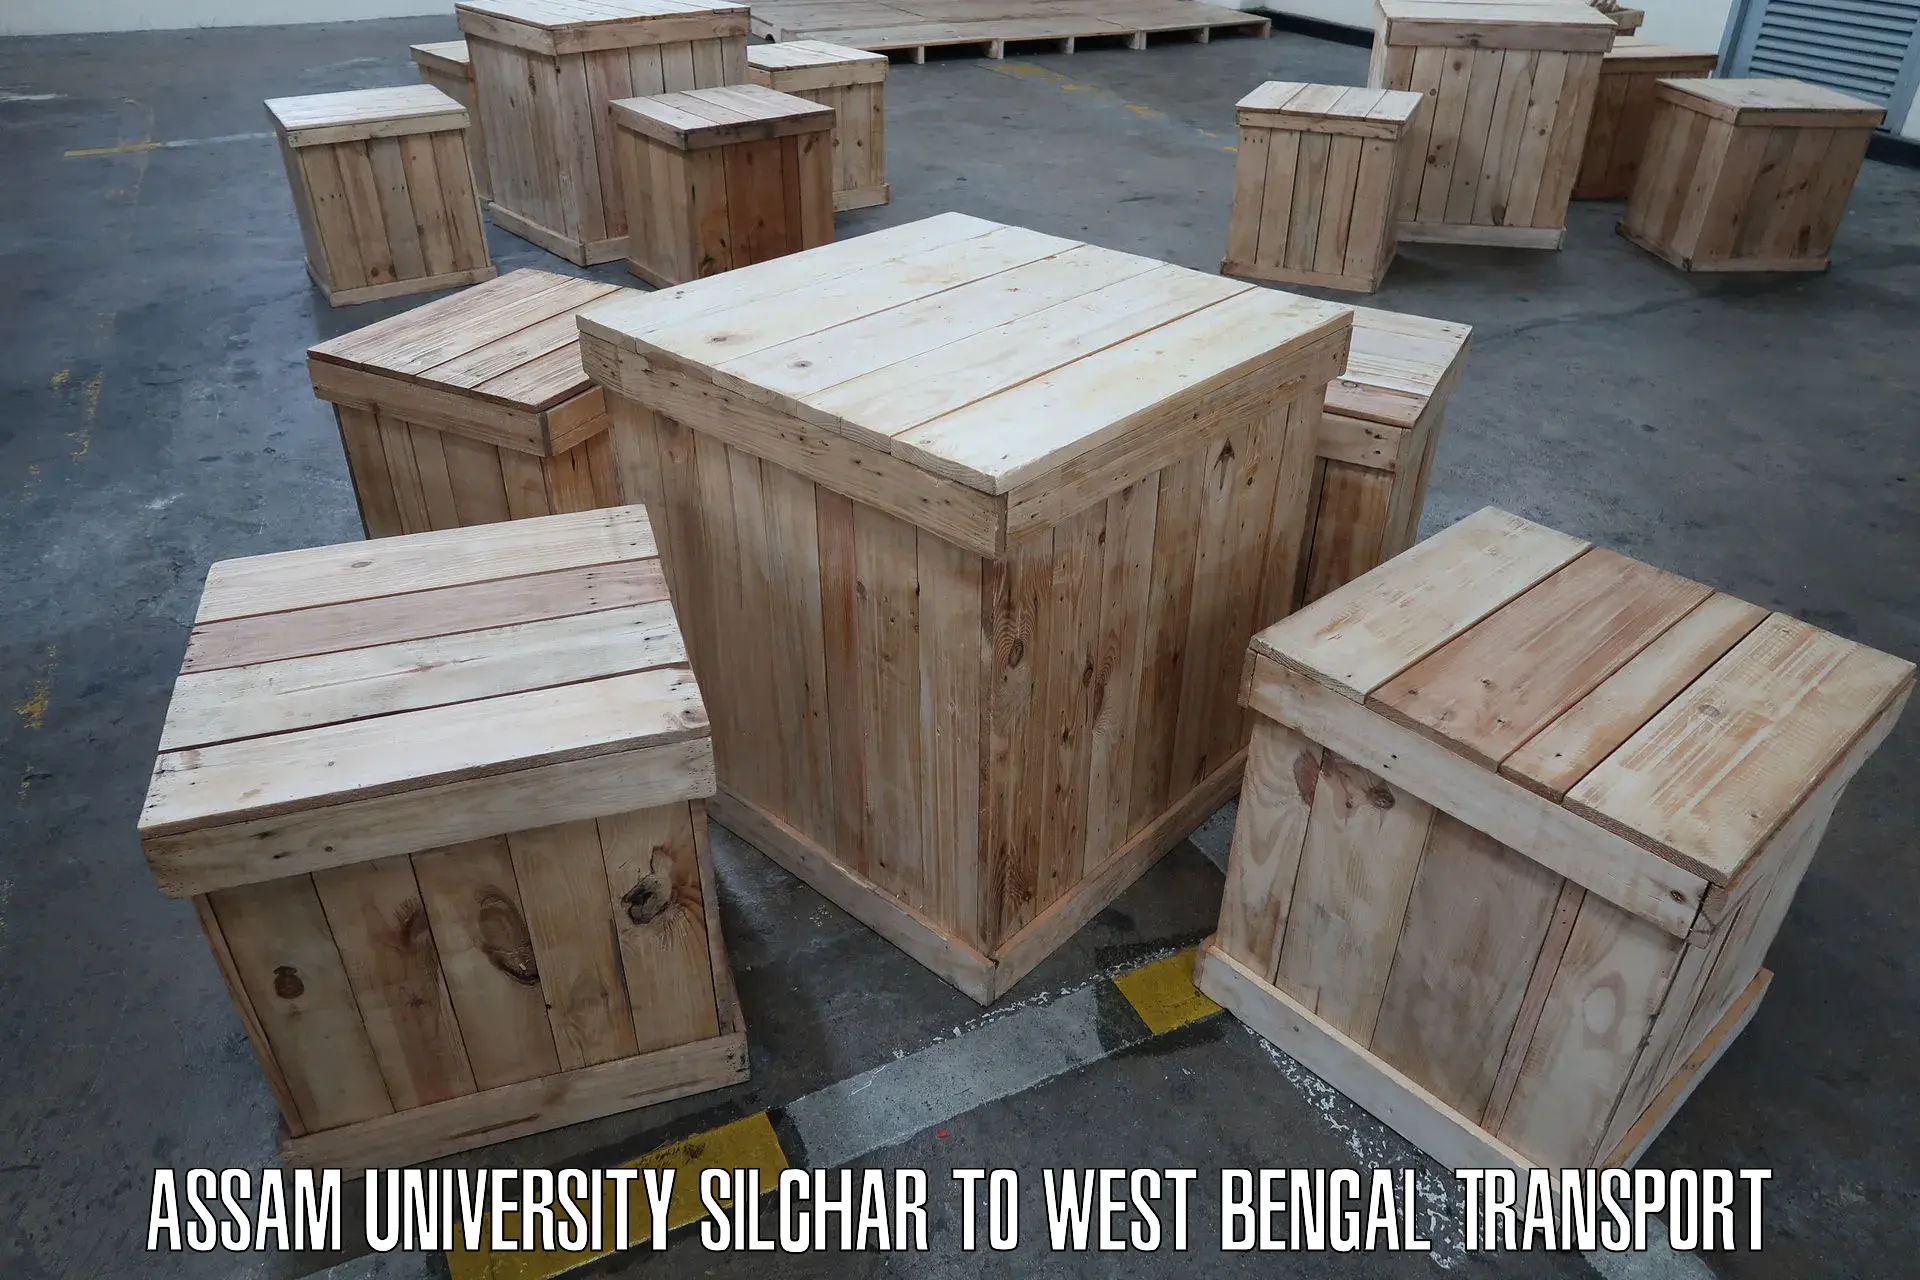 Container transport service Assam University Silchar to Belgharia